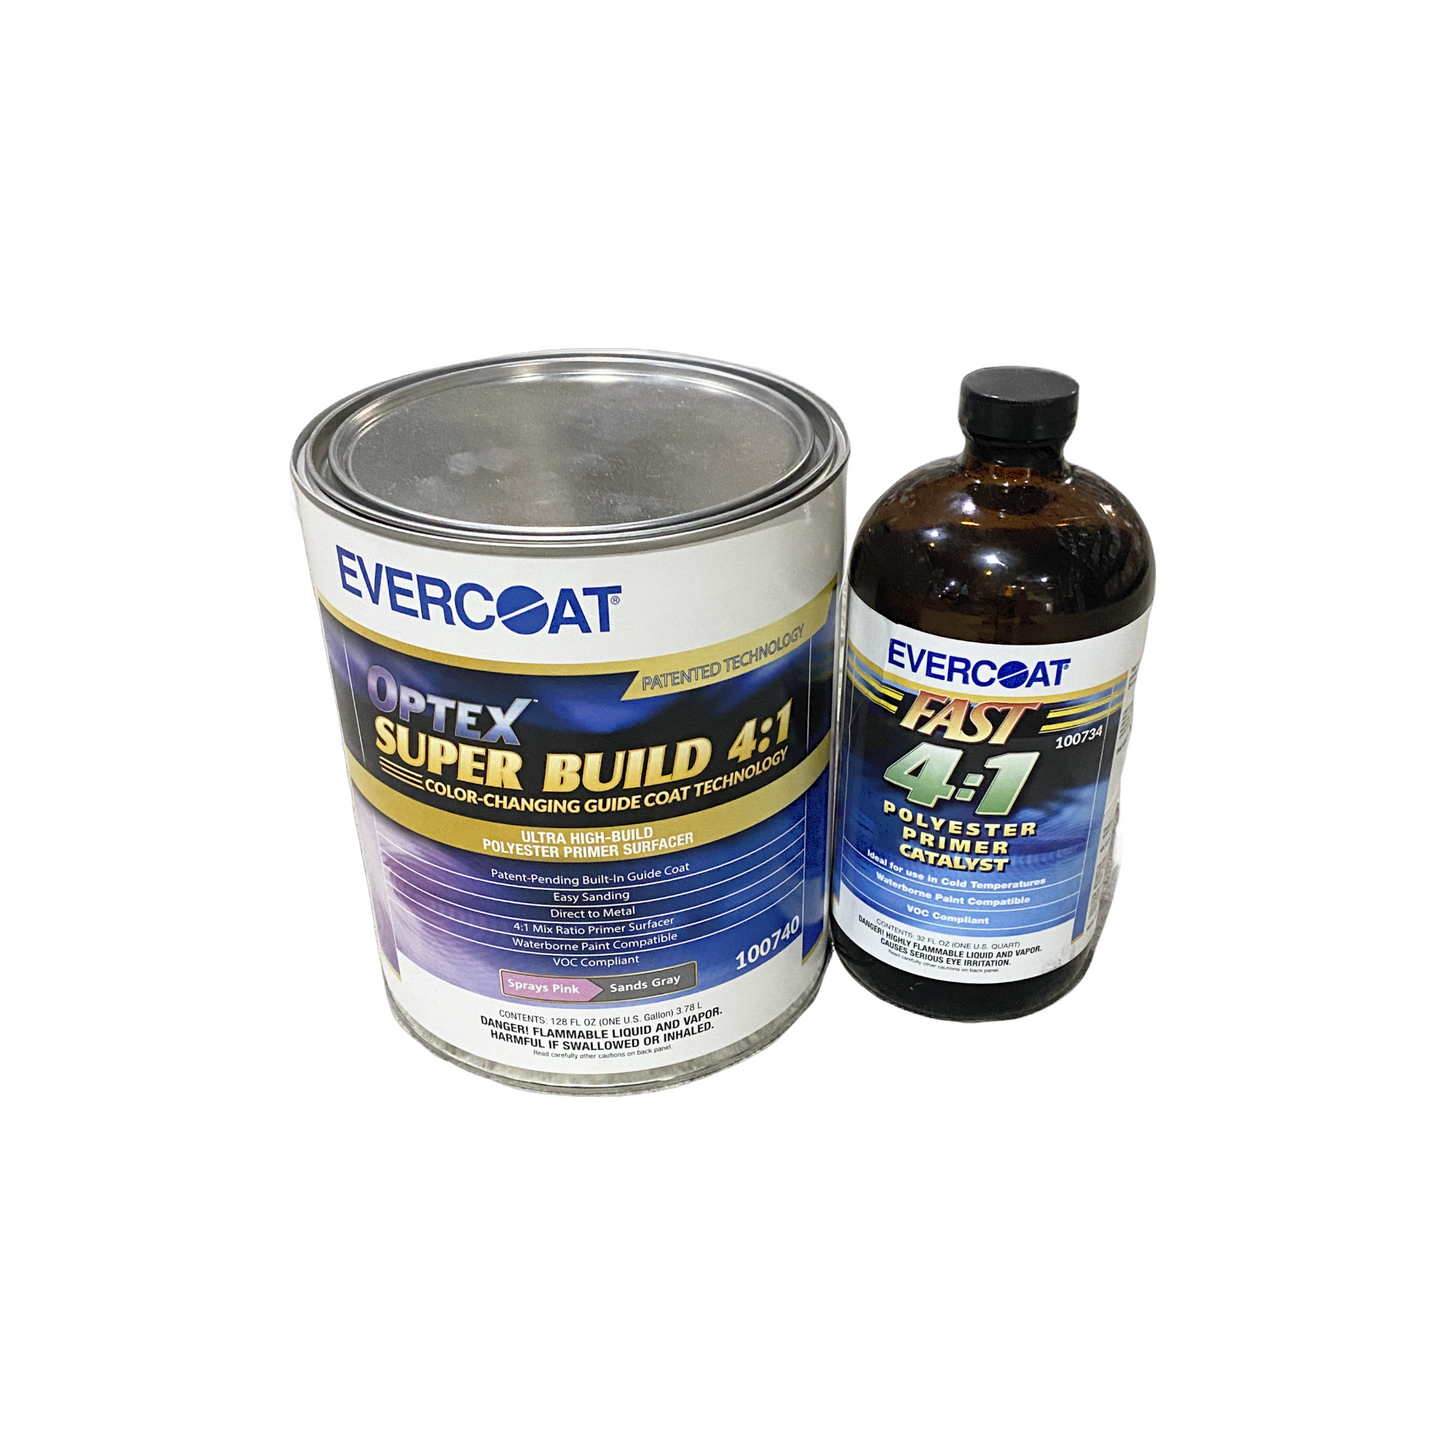 Evercoat Optex Super Build 4:1 Color-Changing Technology Ultra High-Build Polyester Primer Surfacer 3.78L - Fast Catalyst Included - 100740 / 100734